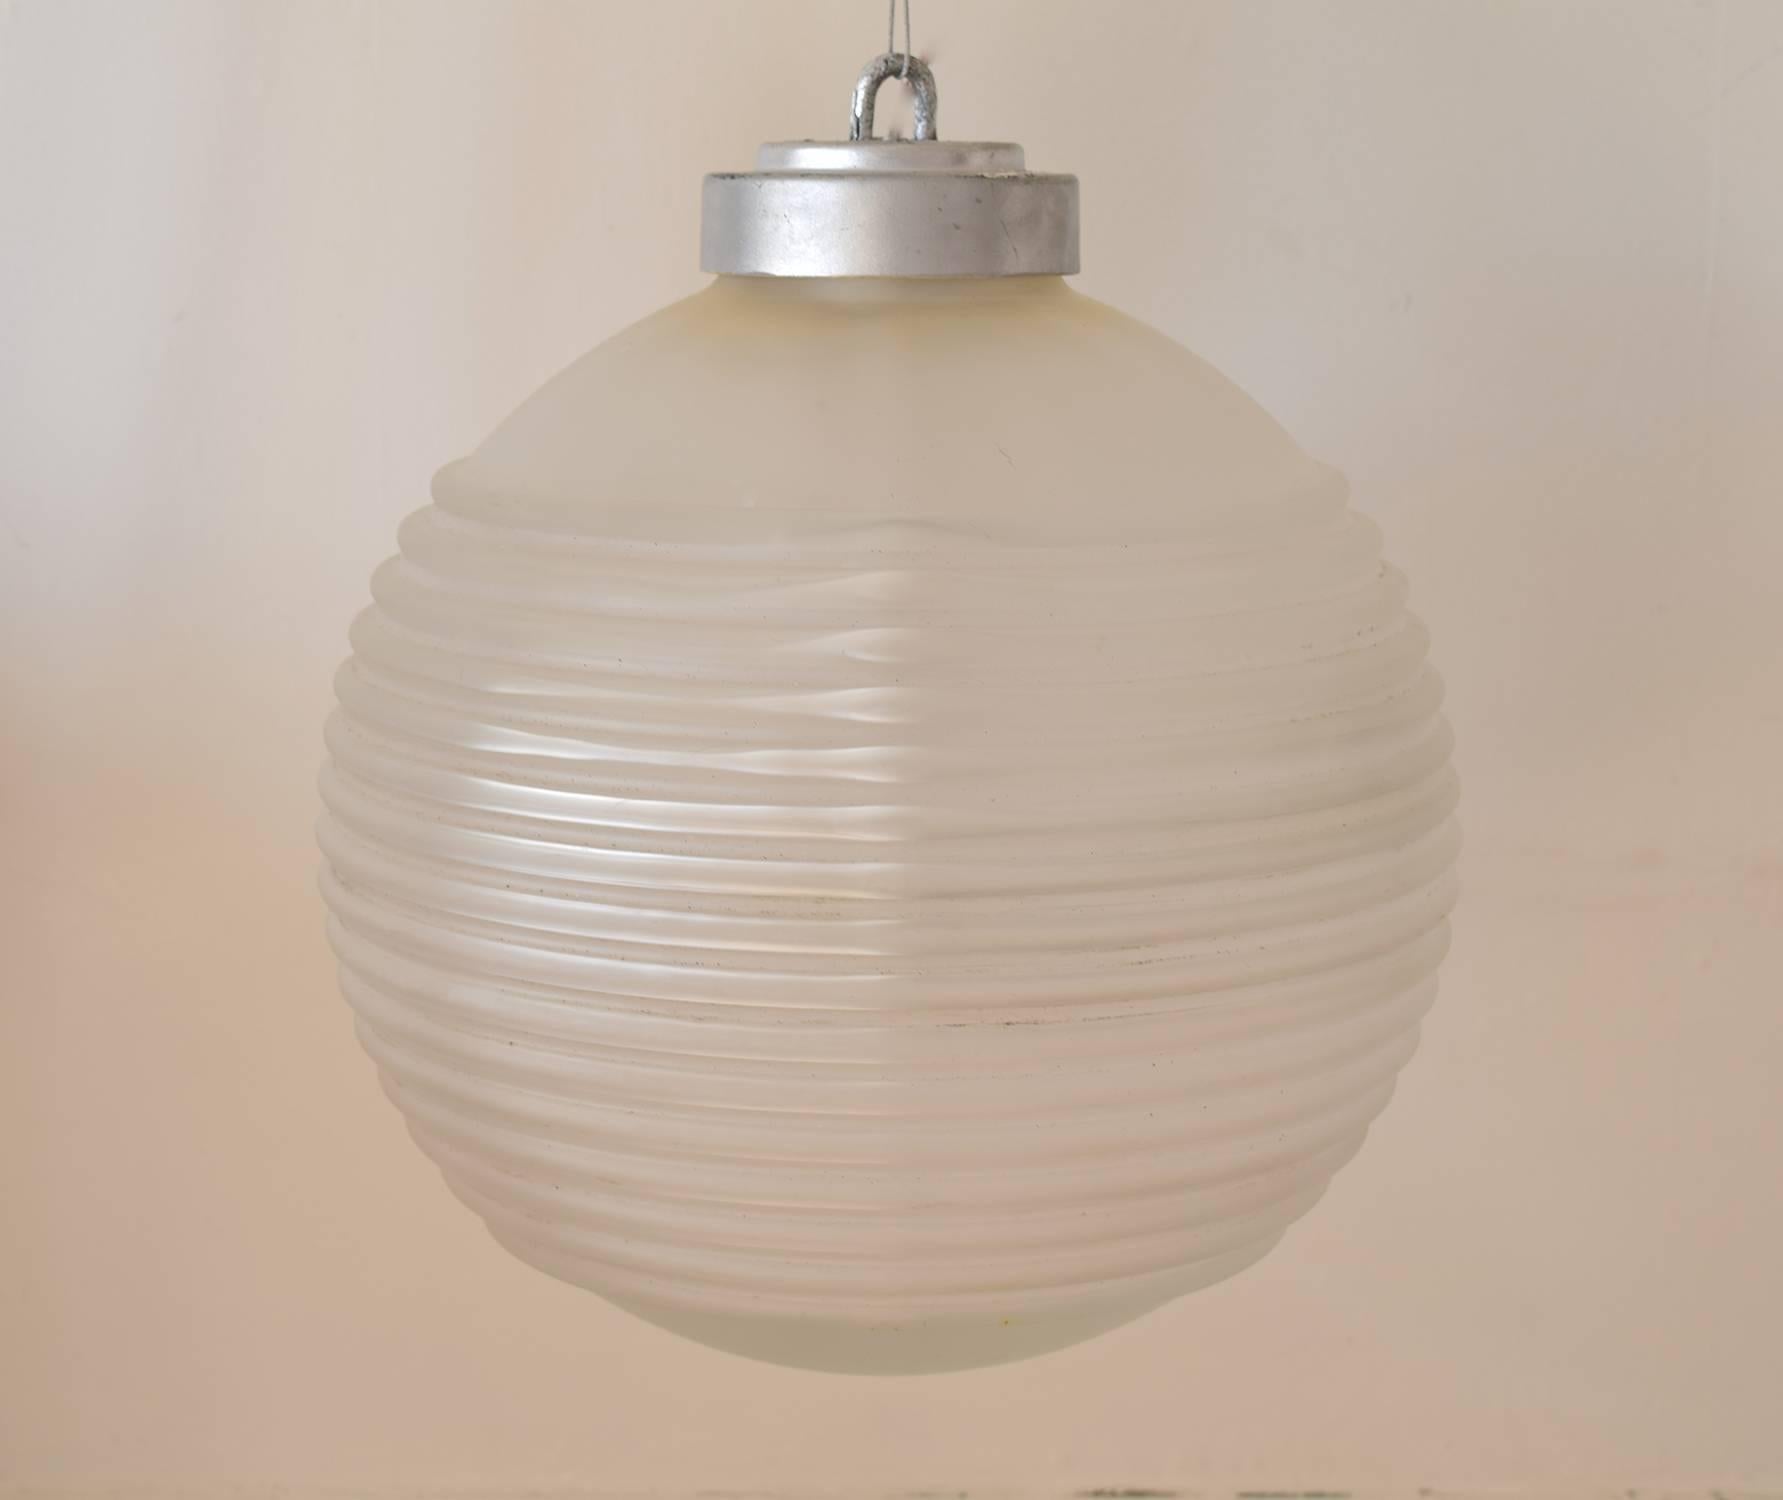 Stylish hanging light fitting.

Made of ribbed opaque glass with a silver colored Bakelite fitting at the top.

Both the glass and the fitting are threaded.

A very simple operation to split the two parts.

Free shipping.